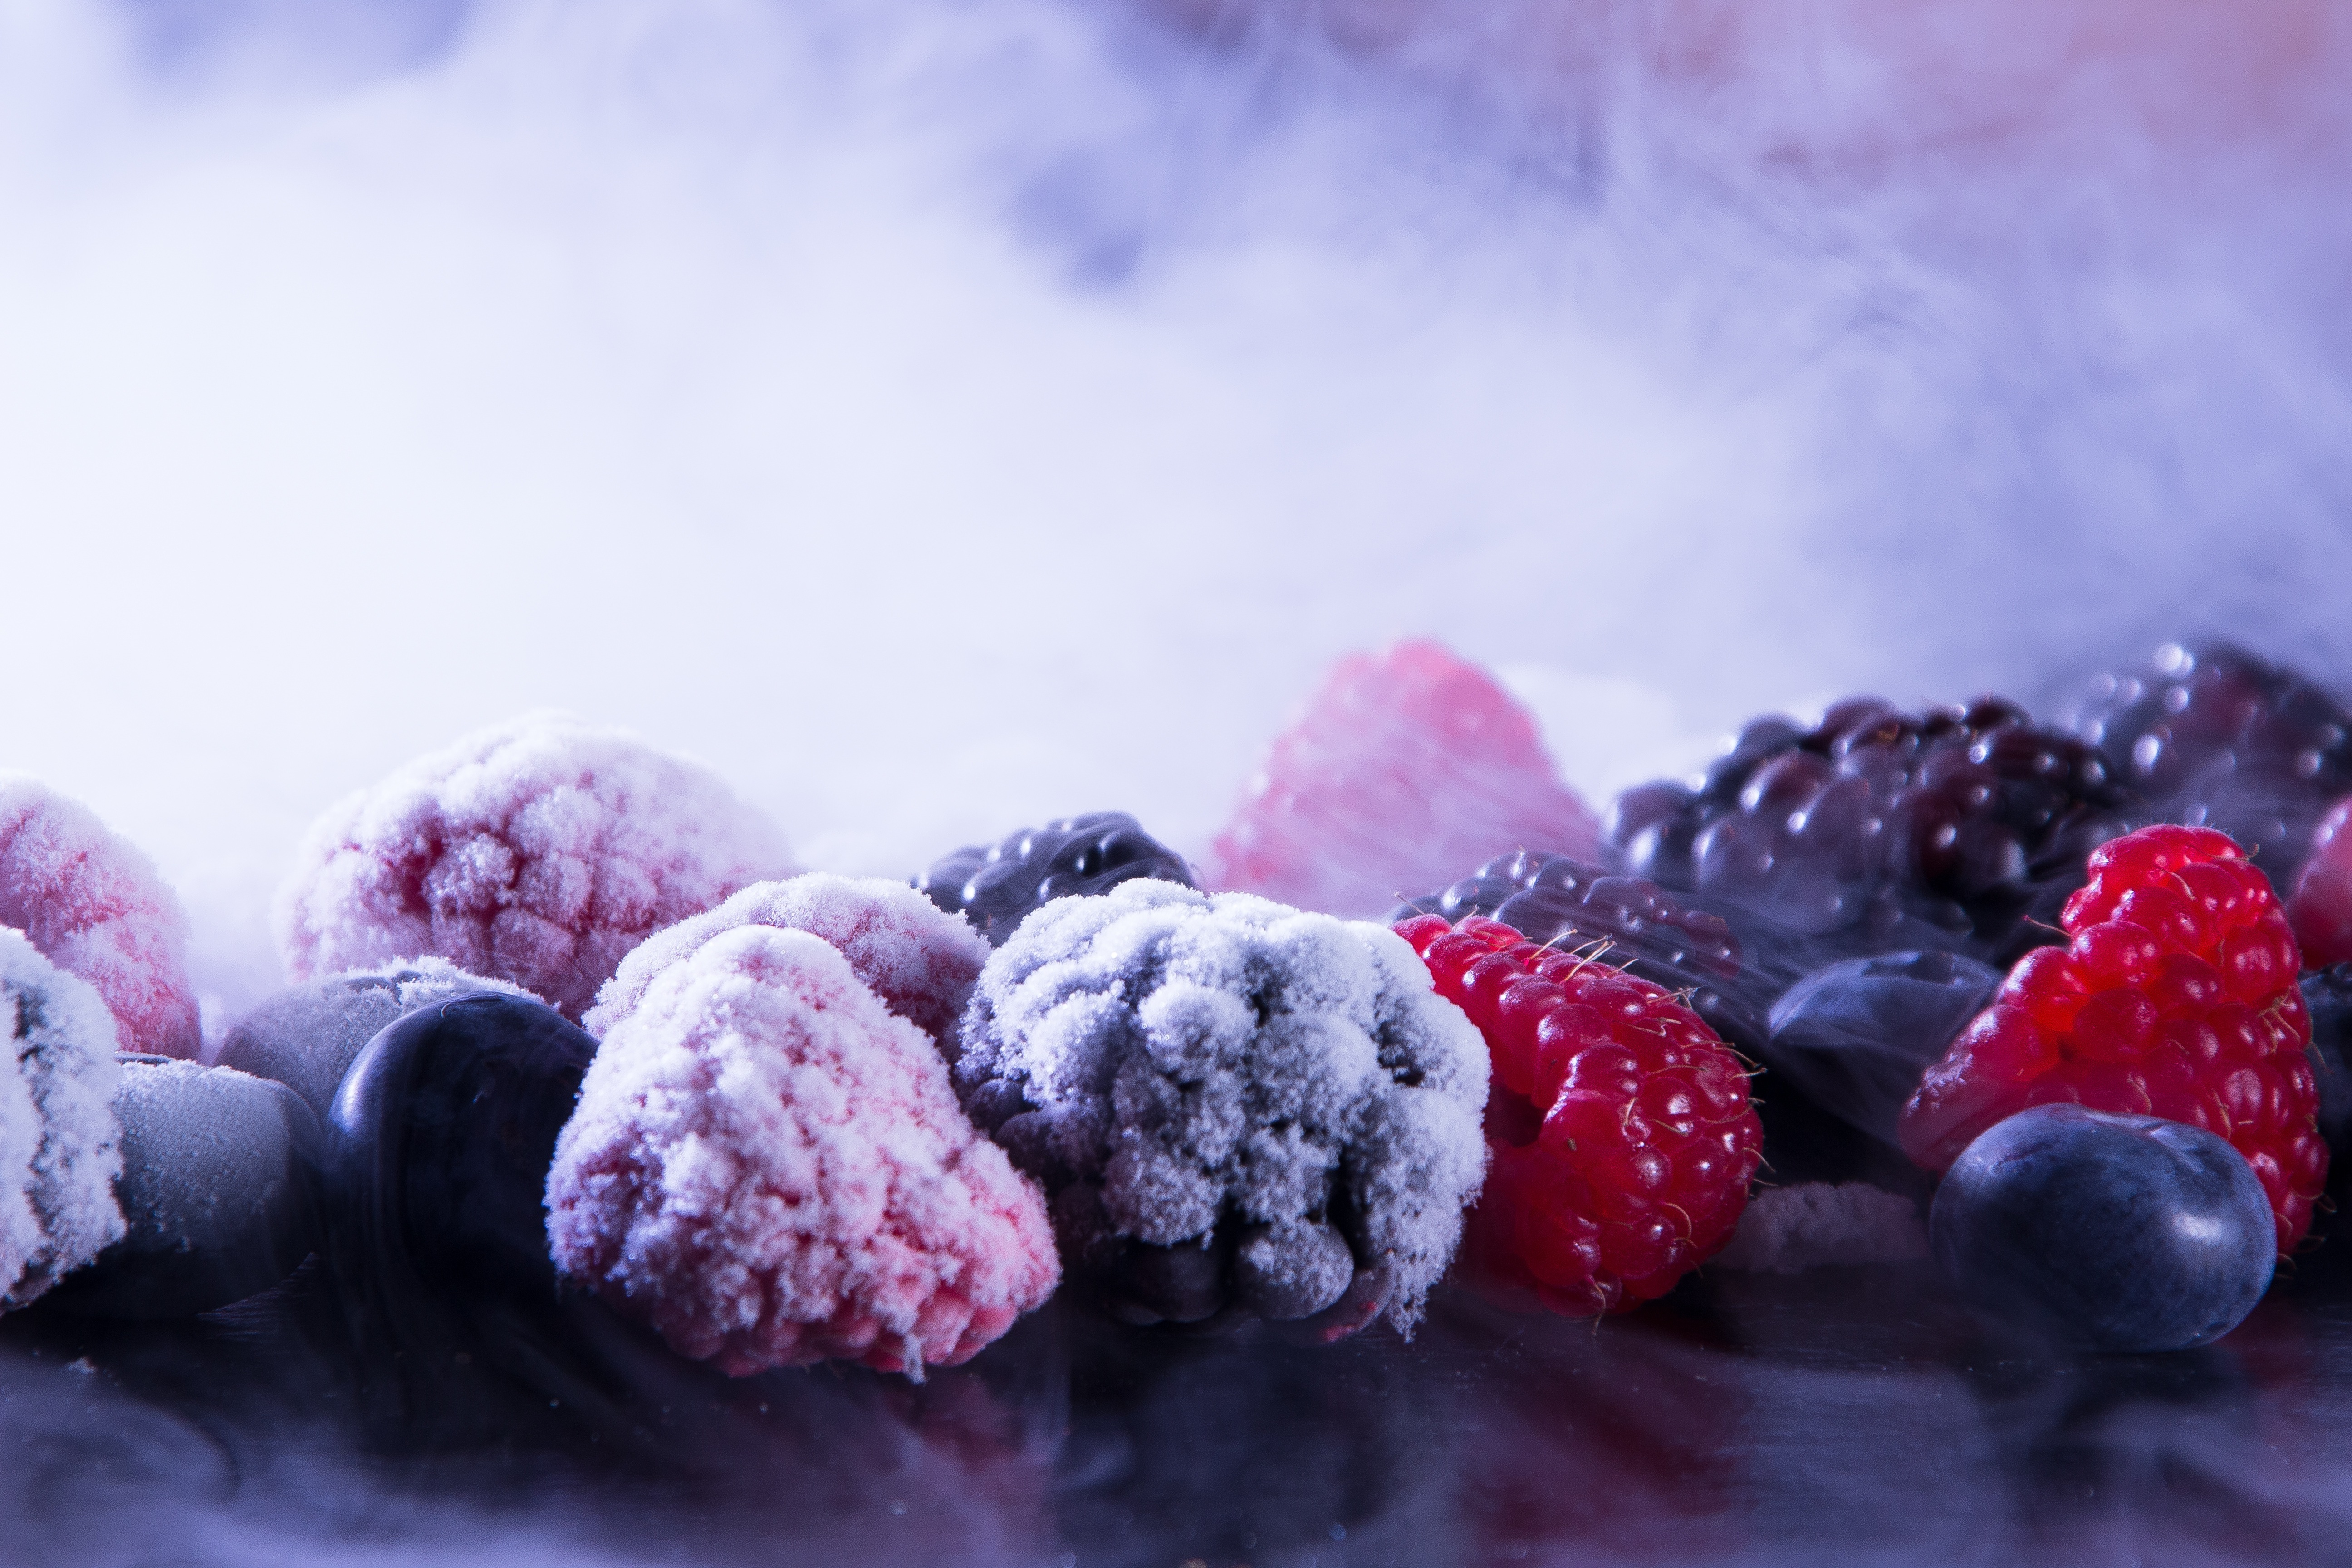 65511 download wallpaper food, raspberry, bilberries, berries, blackberry, frozen, steam screensavers and pictures for free